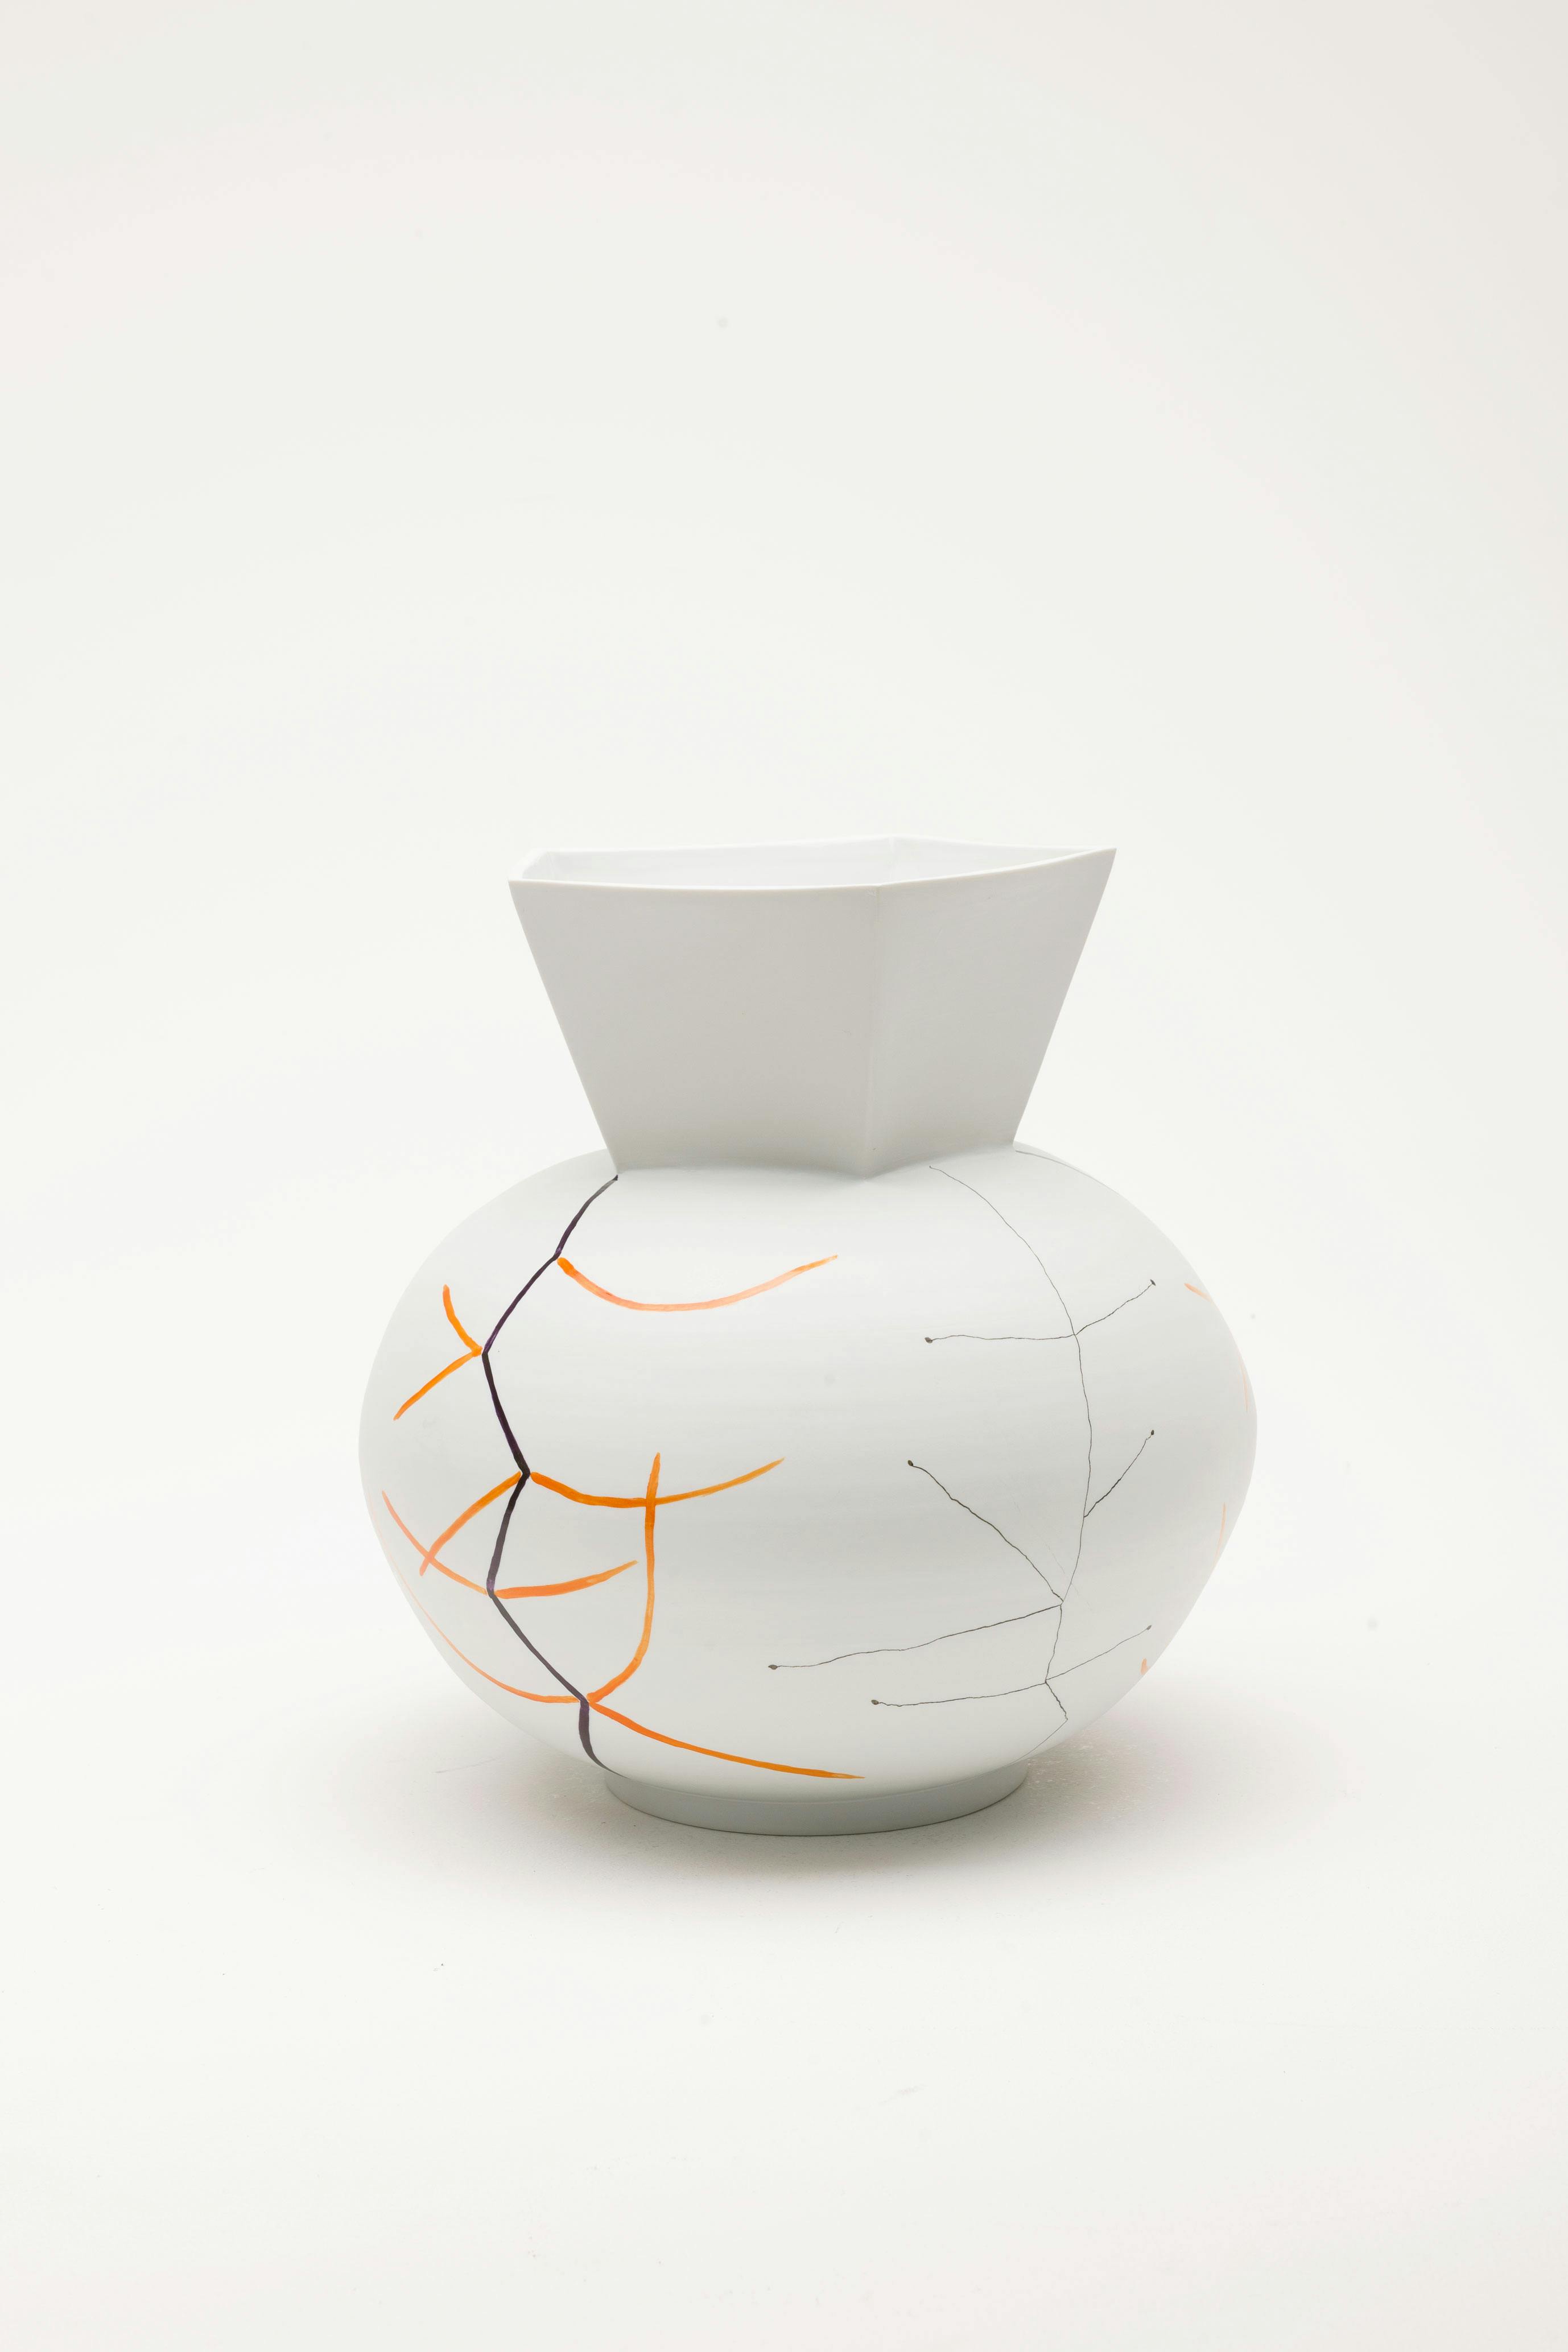  A white ceramic vase painted with then orange, black and grey lines. The vase has a bulbous bottom and geometric neck. 